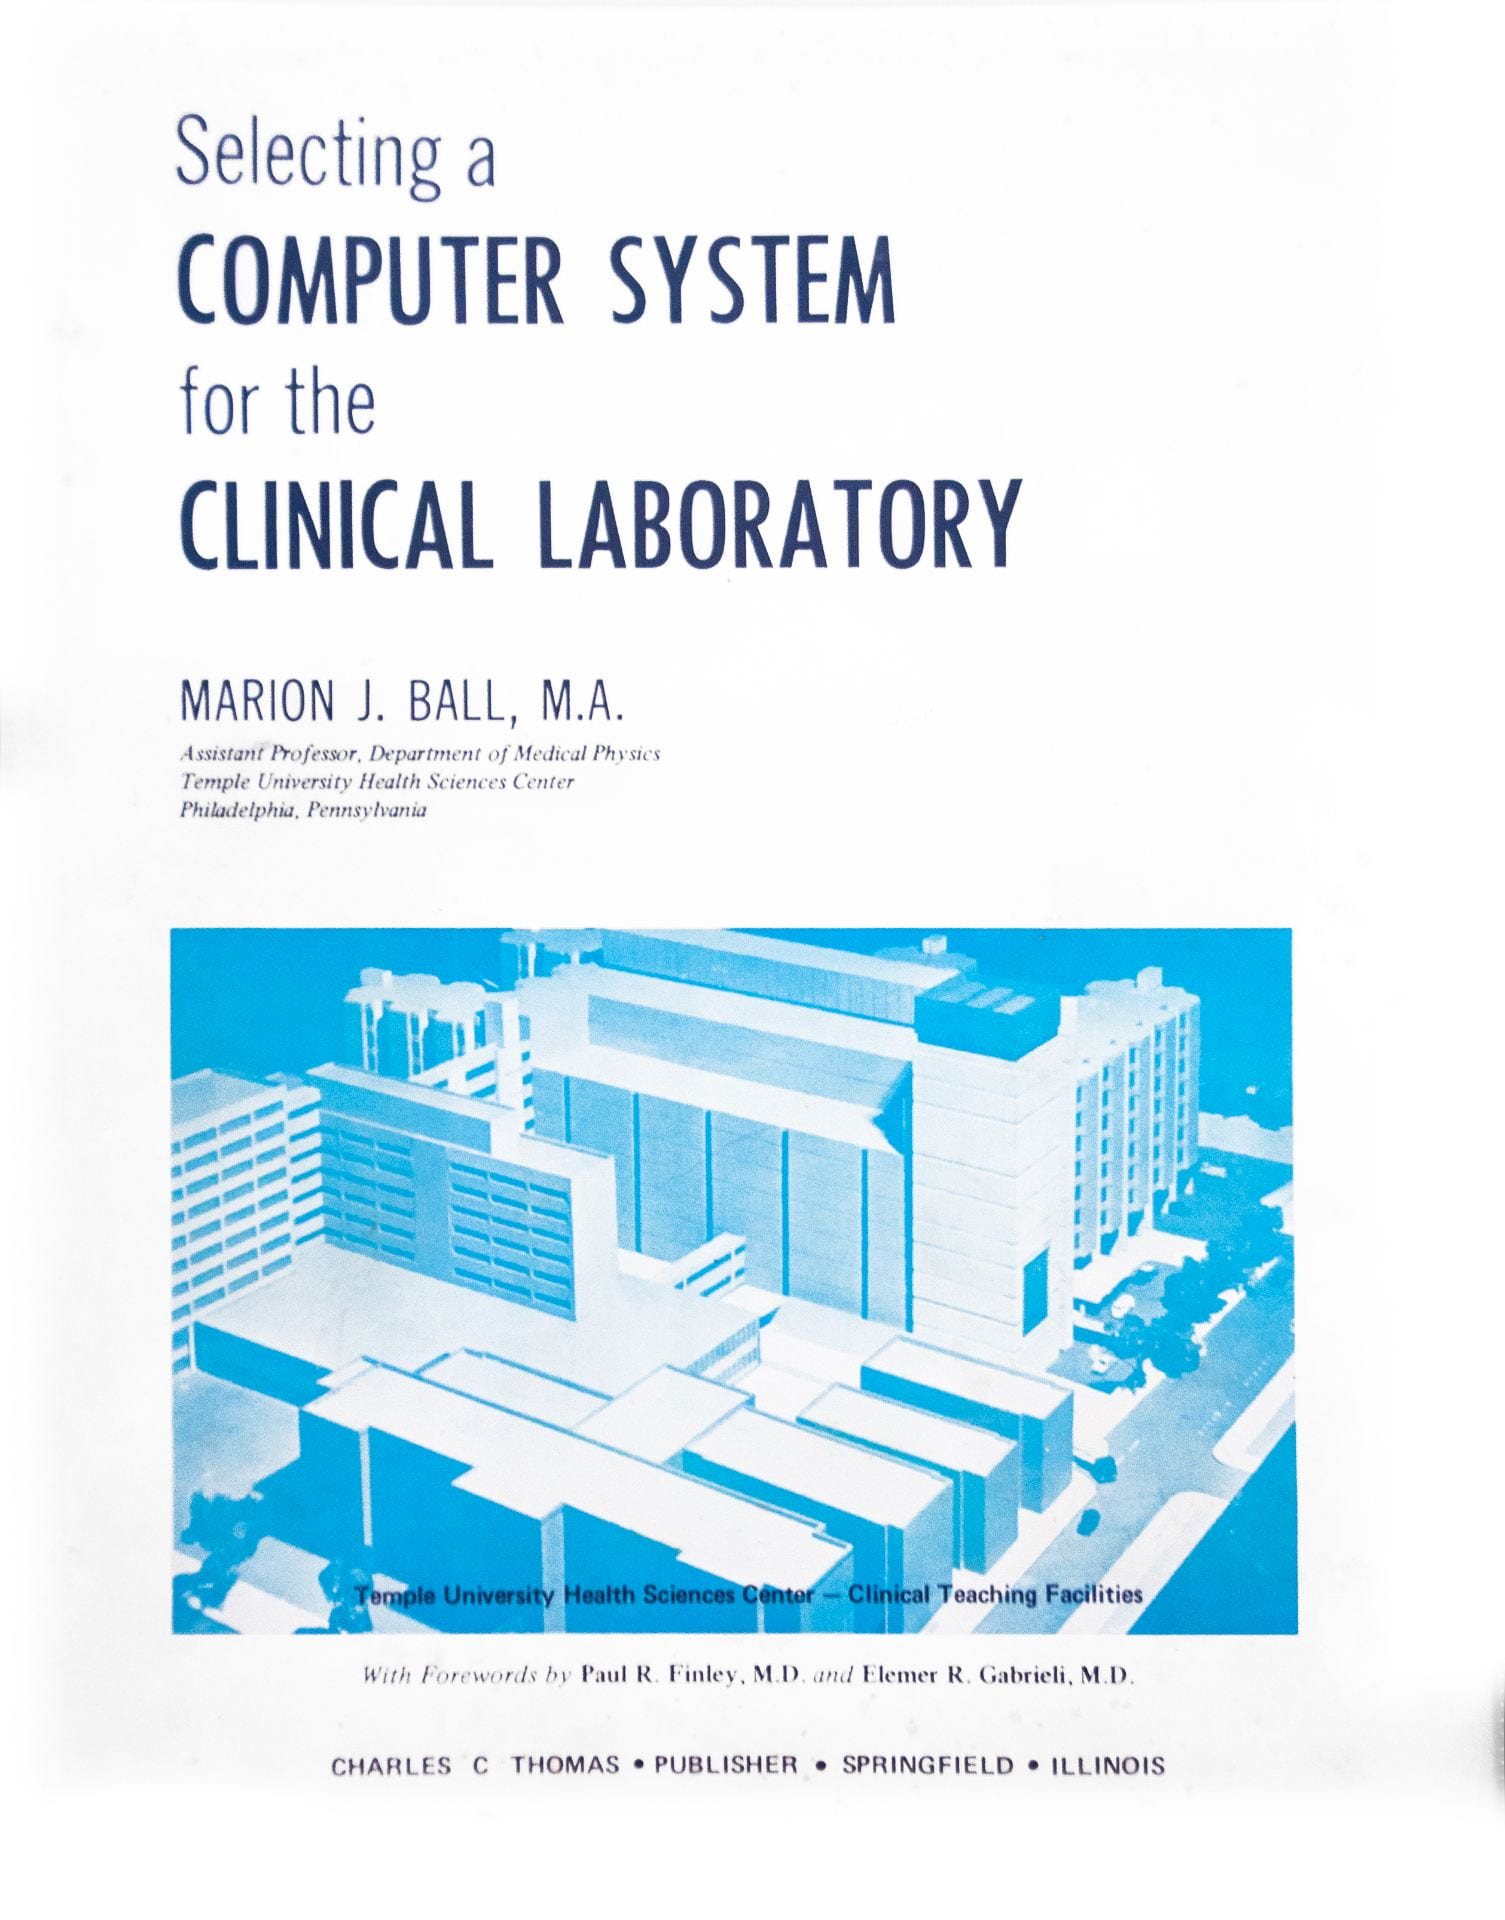 Selecting a Computer System for the Clinical Laboratory